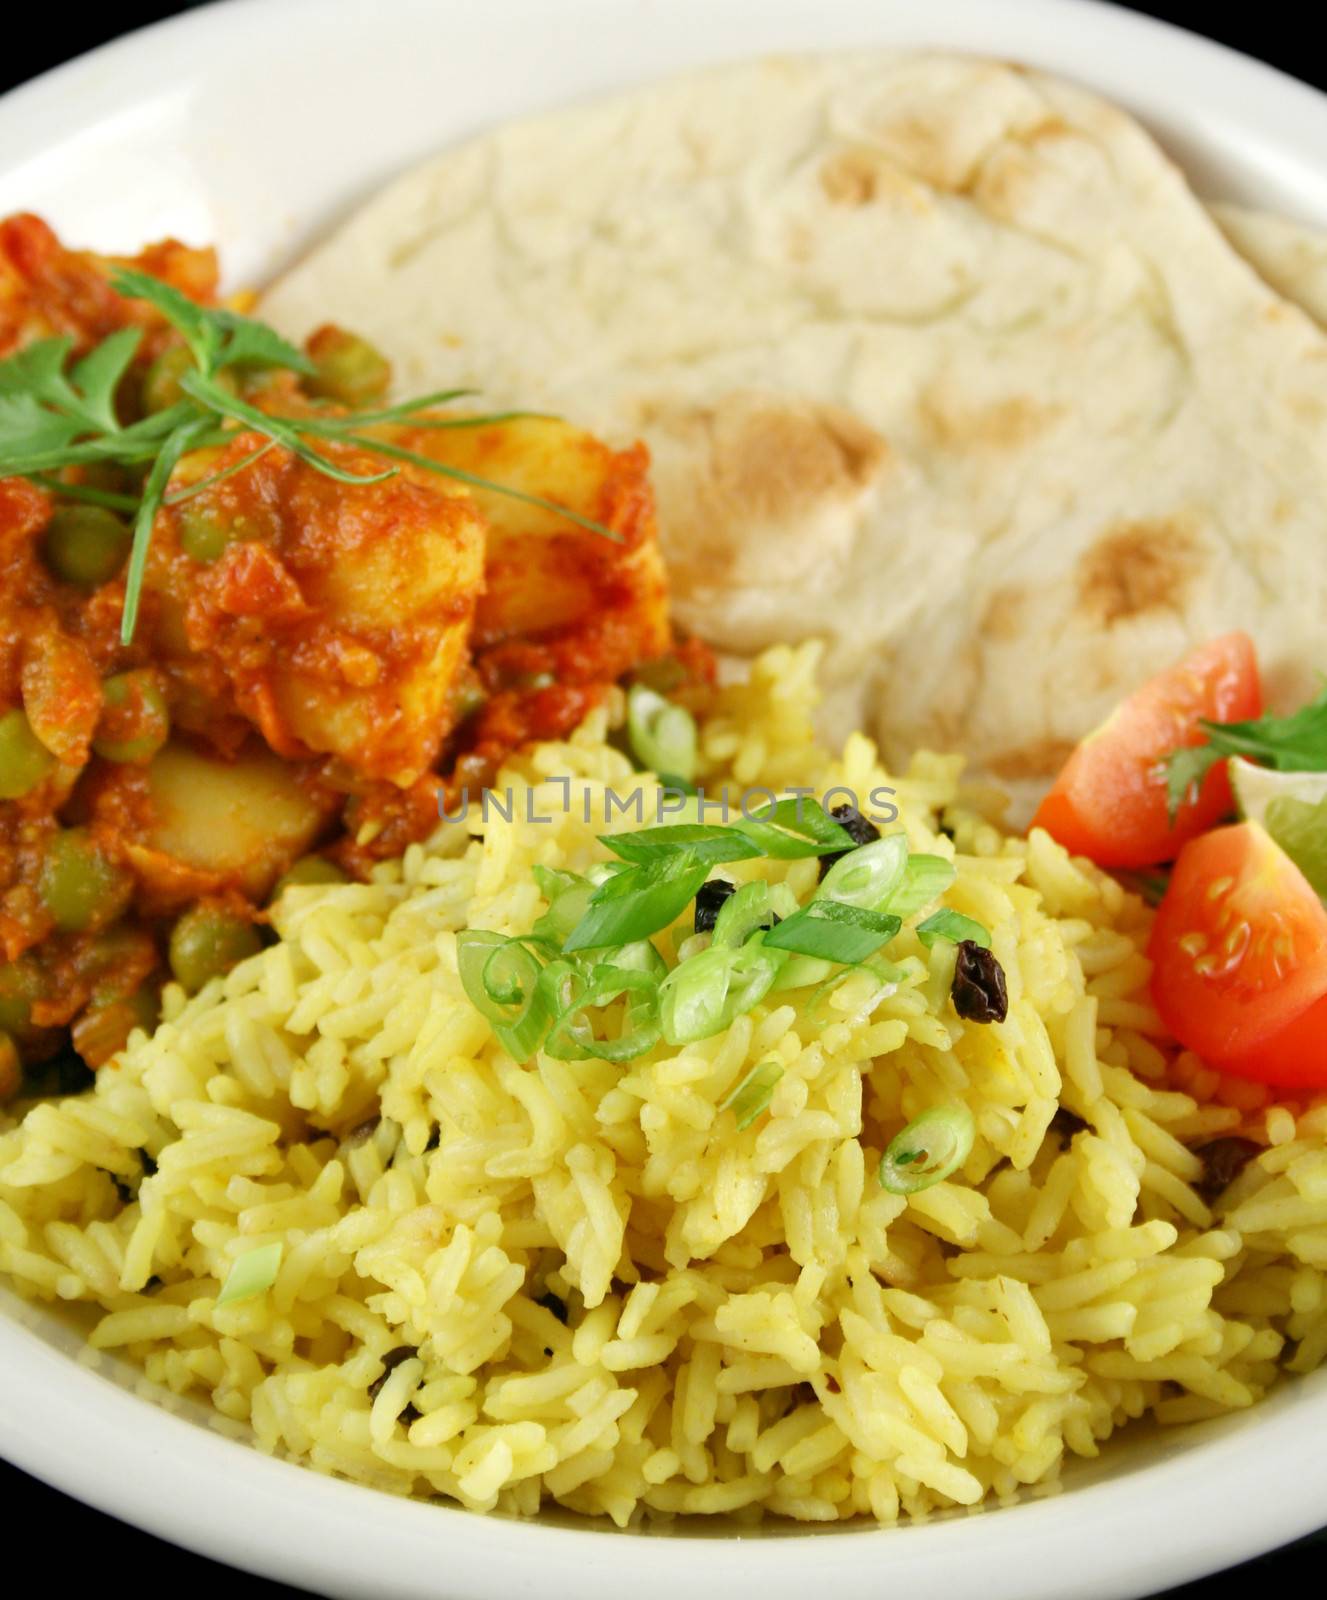 Indian pea and potato curry with tumeric rice and a side salad.